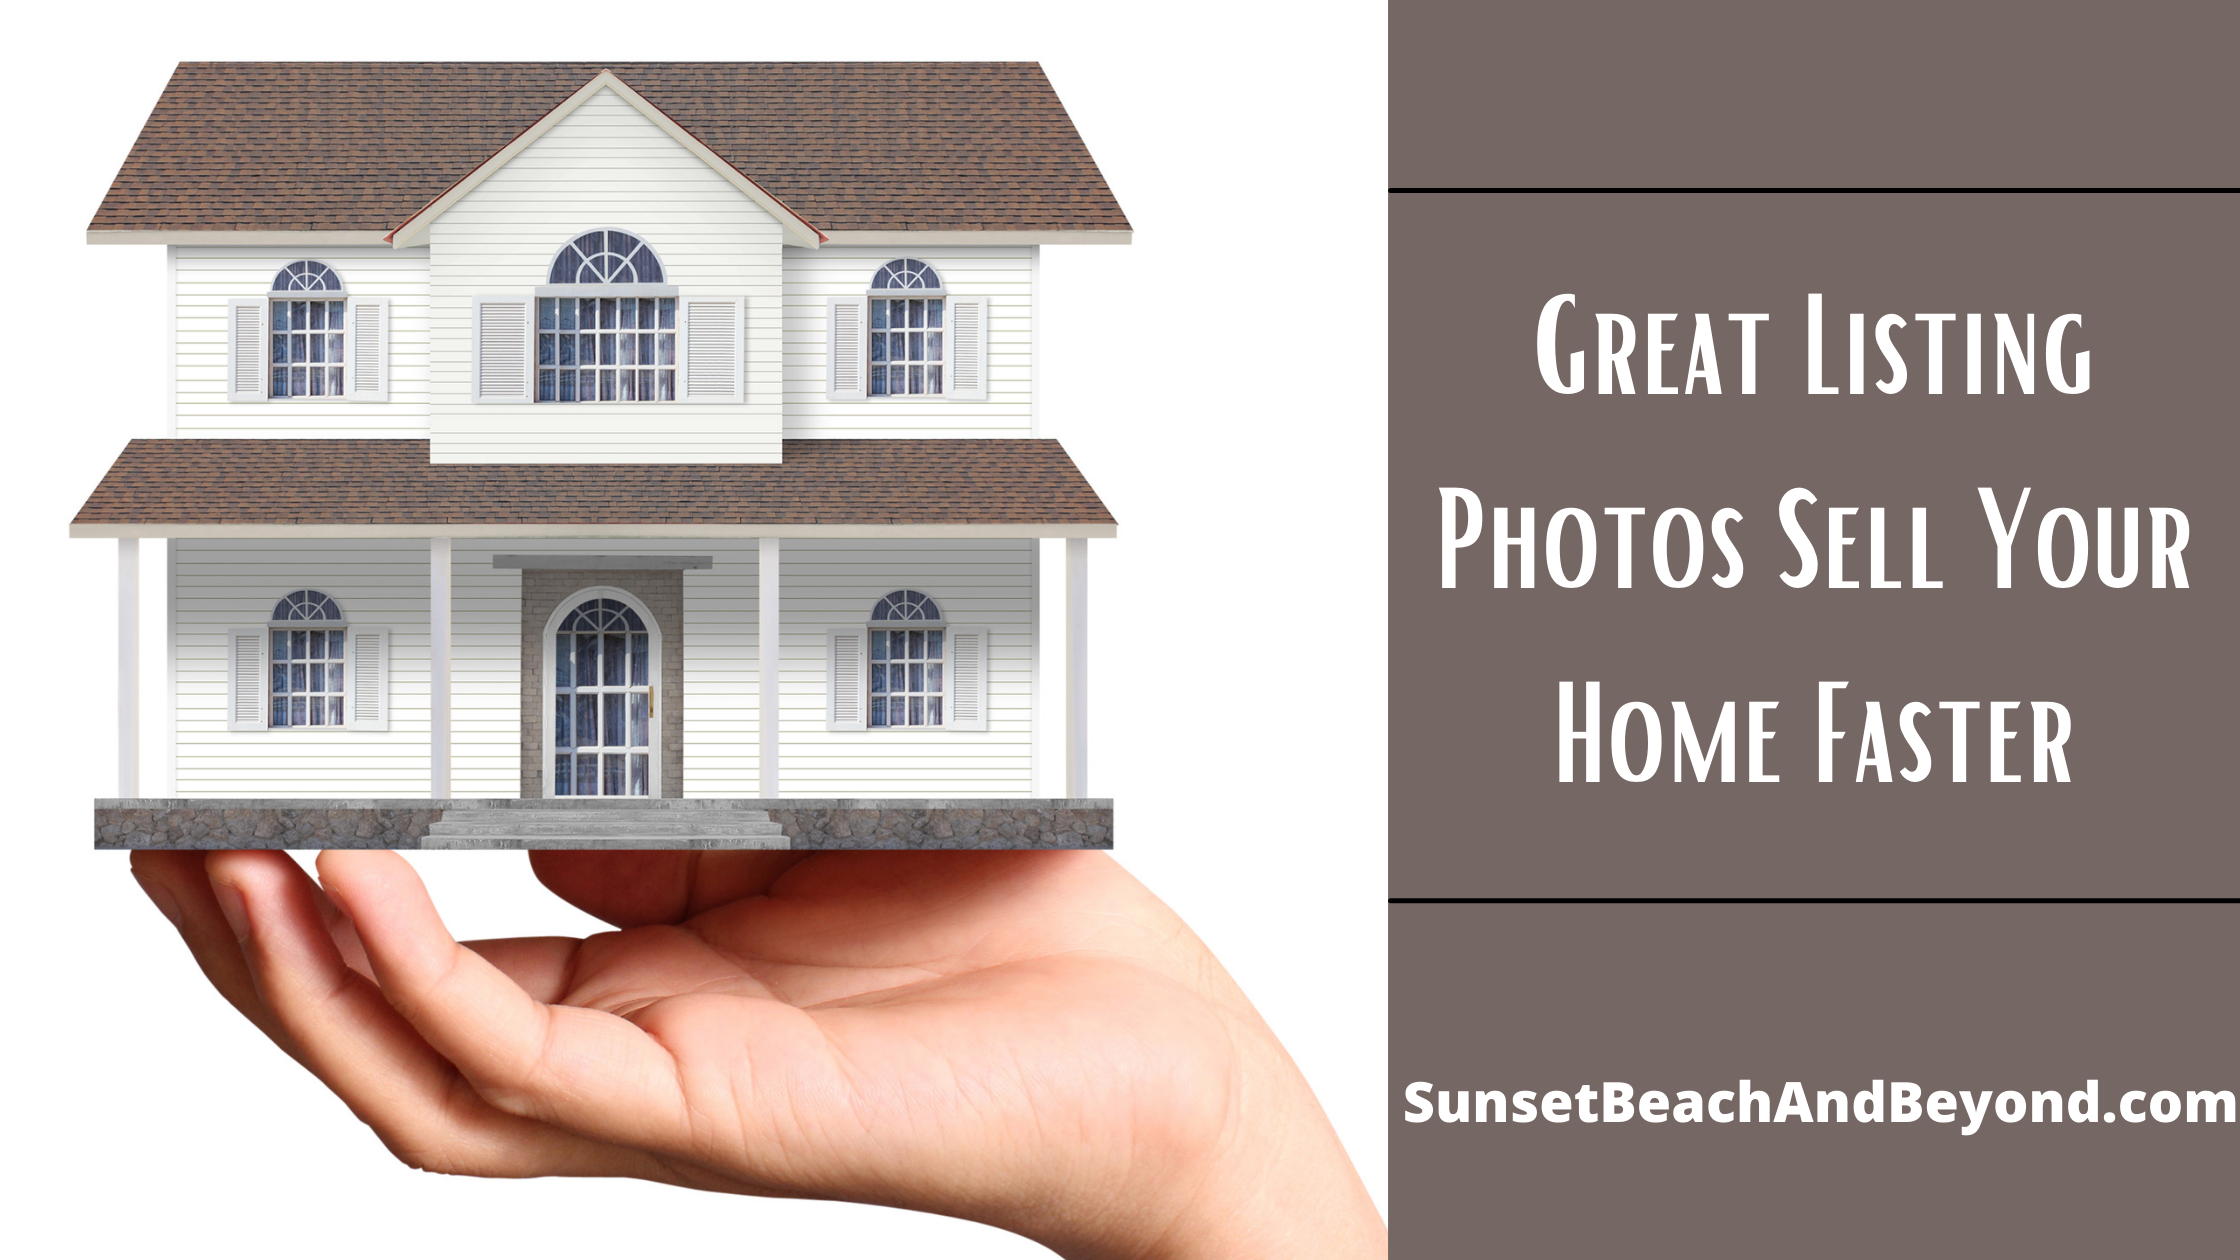 Great Listing Photos Sell Your Home Faster